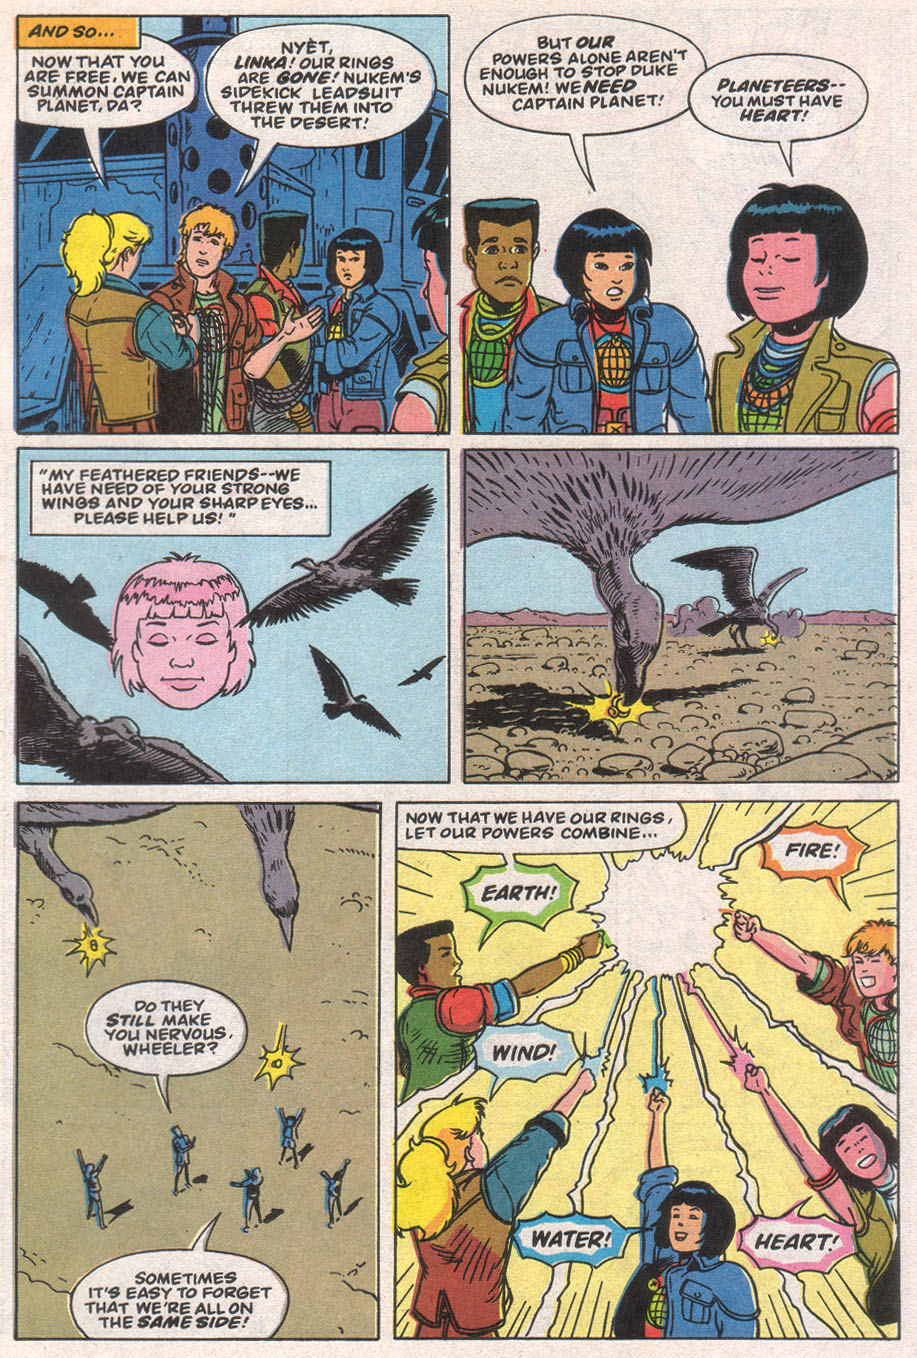 Captain Planet and the Planeteers 11 Page 29